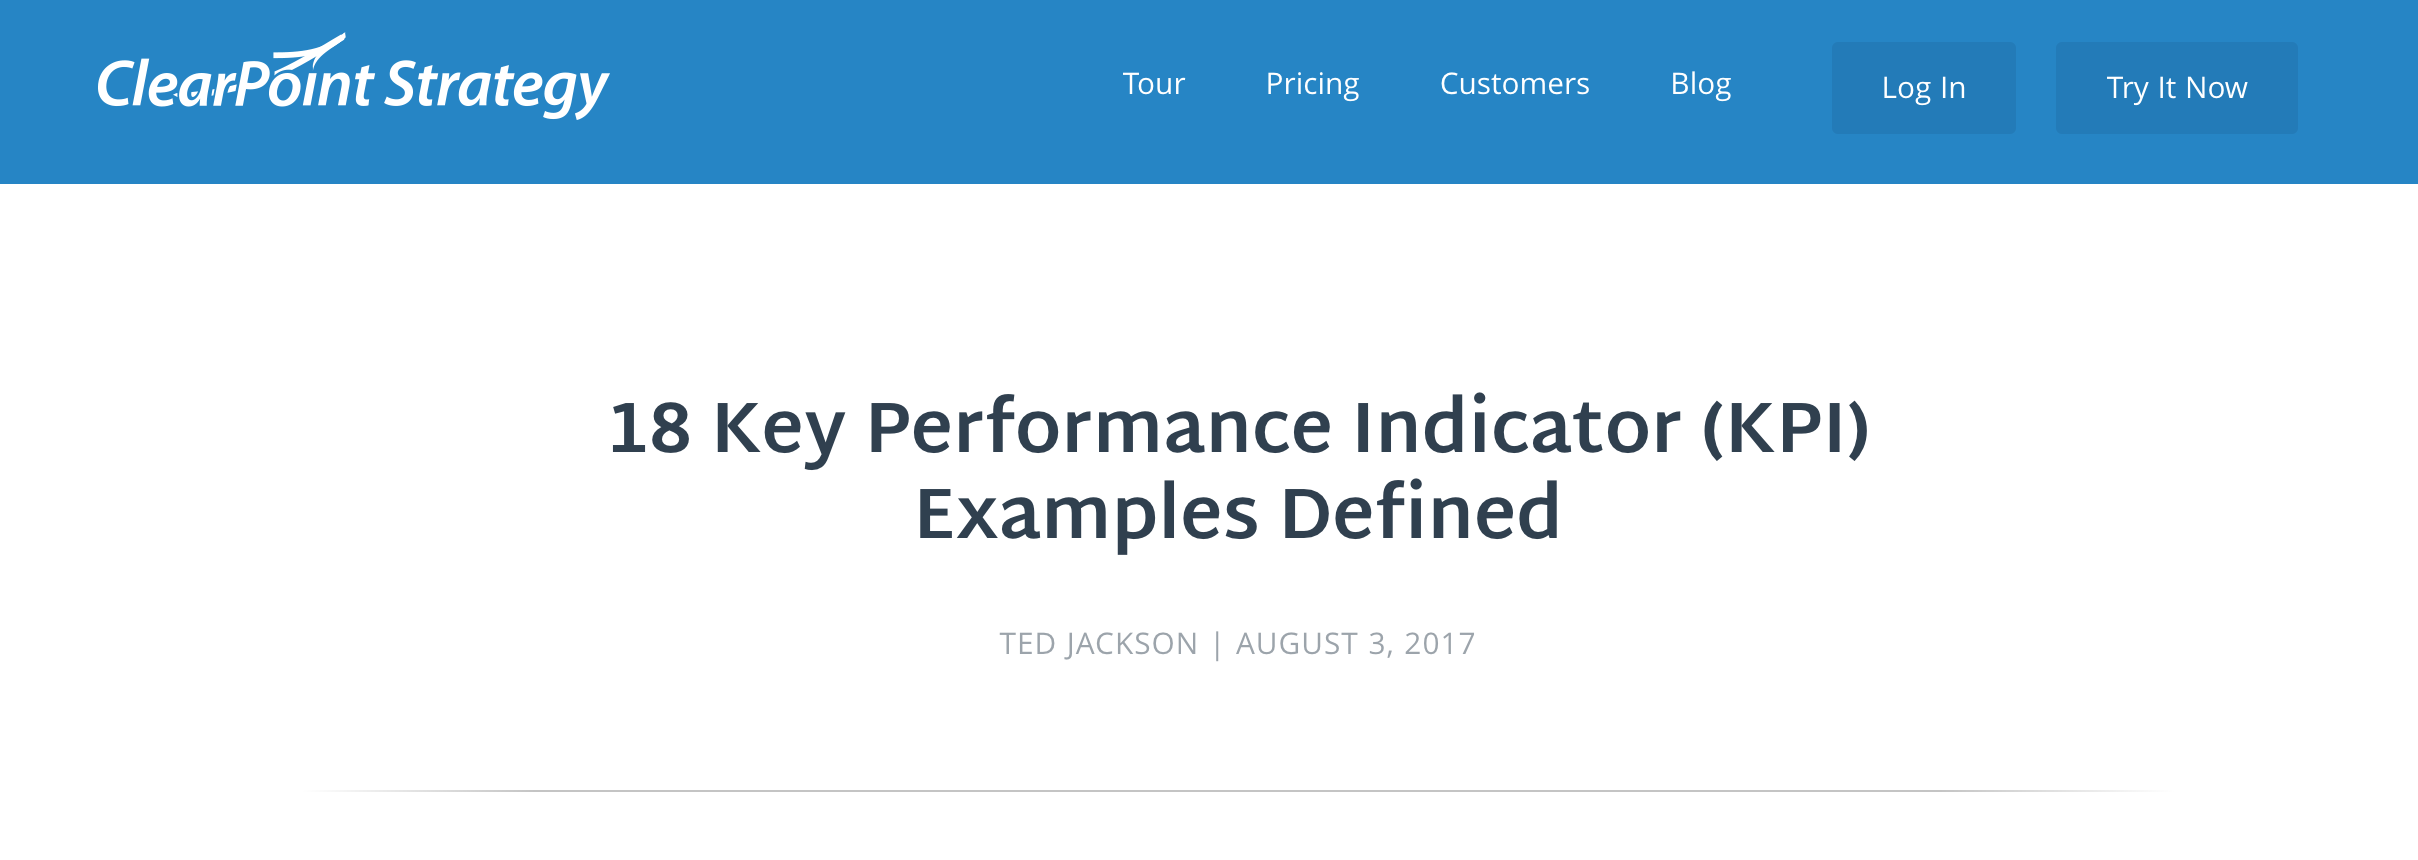 ClearPoint Strategy - 18 Key Performance Indicator (KPI) Examples Defined